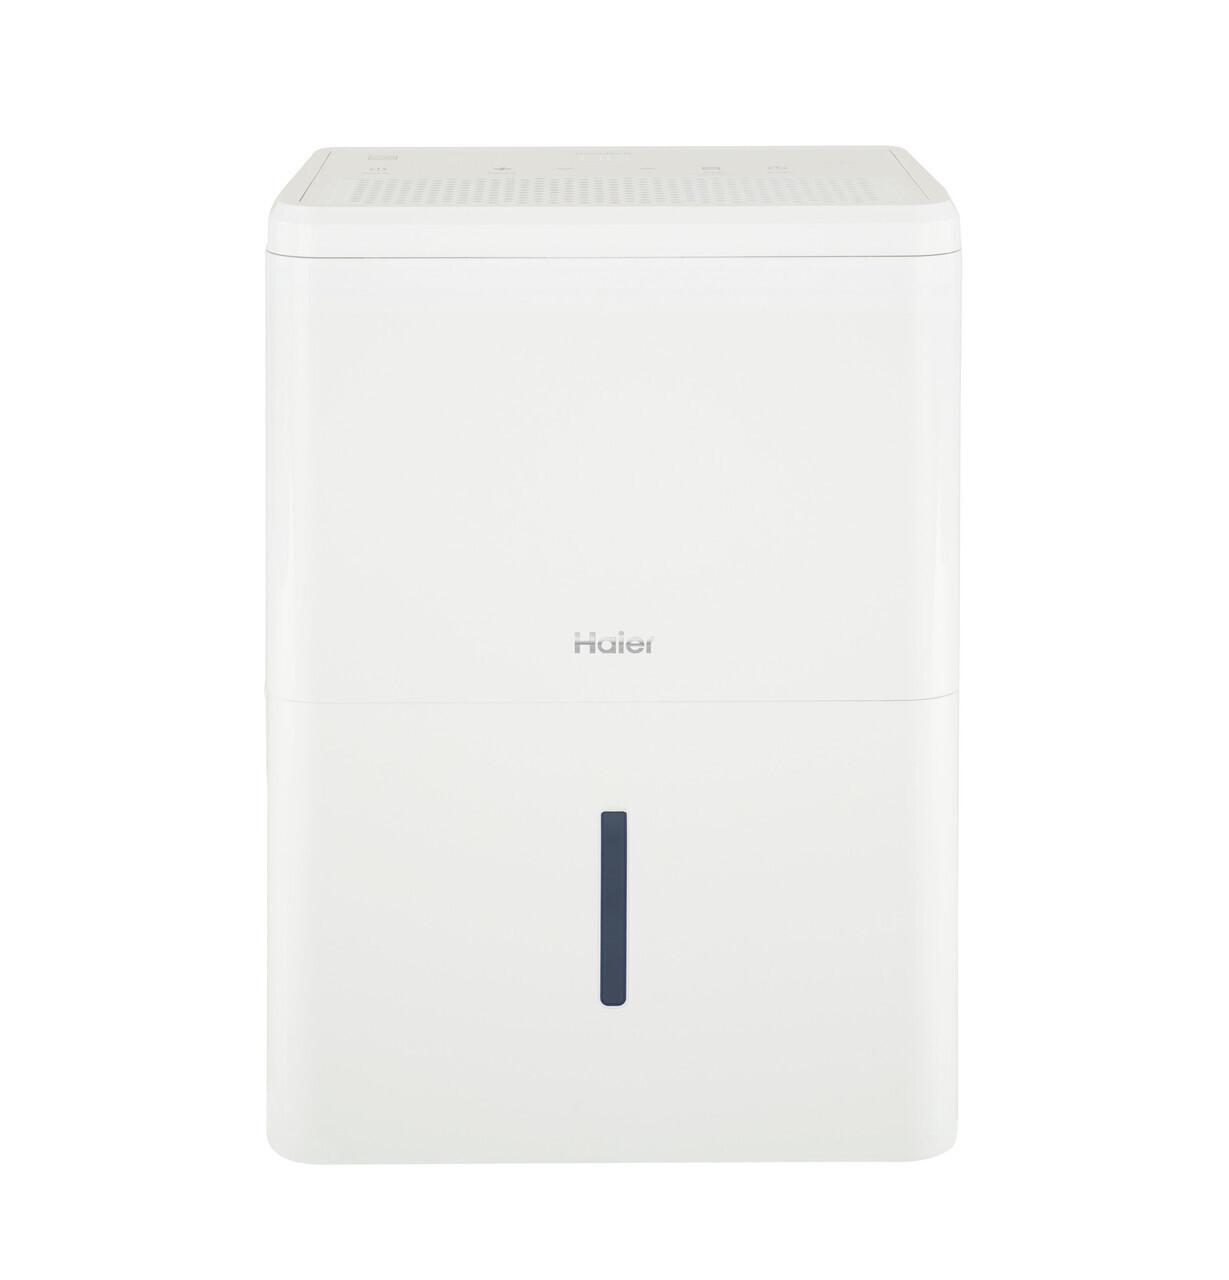 Haier ENERGY STAR® 35 Pint Portable Dehumidifier with Smart Dry for Very Damp Spaces